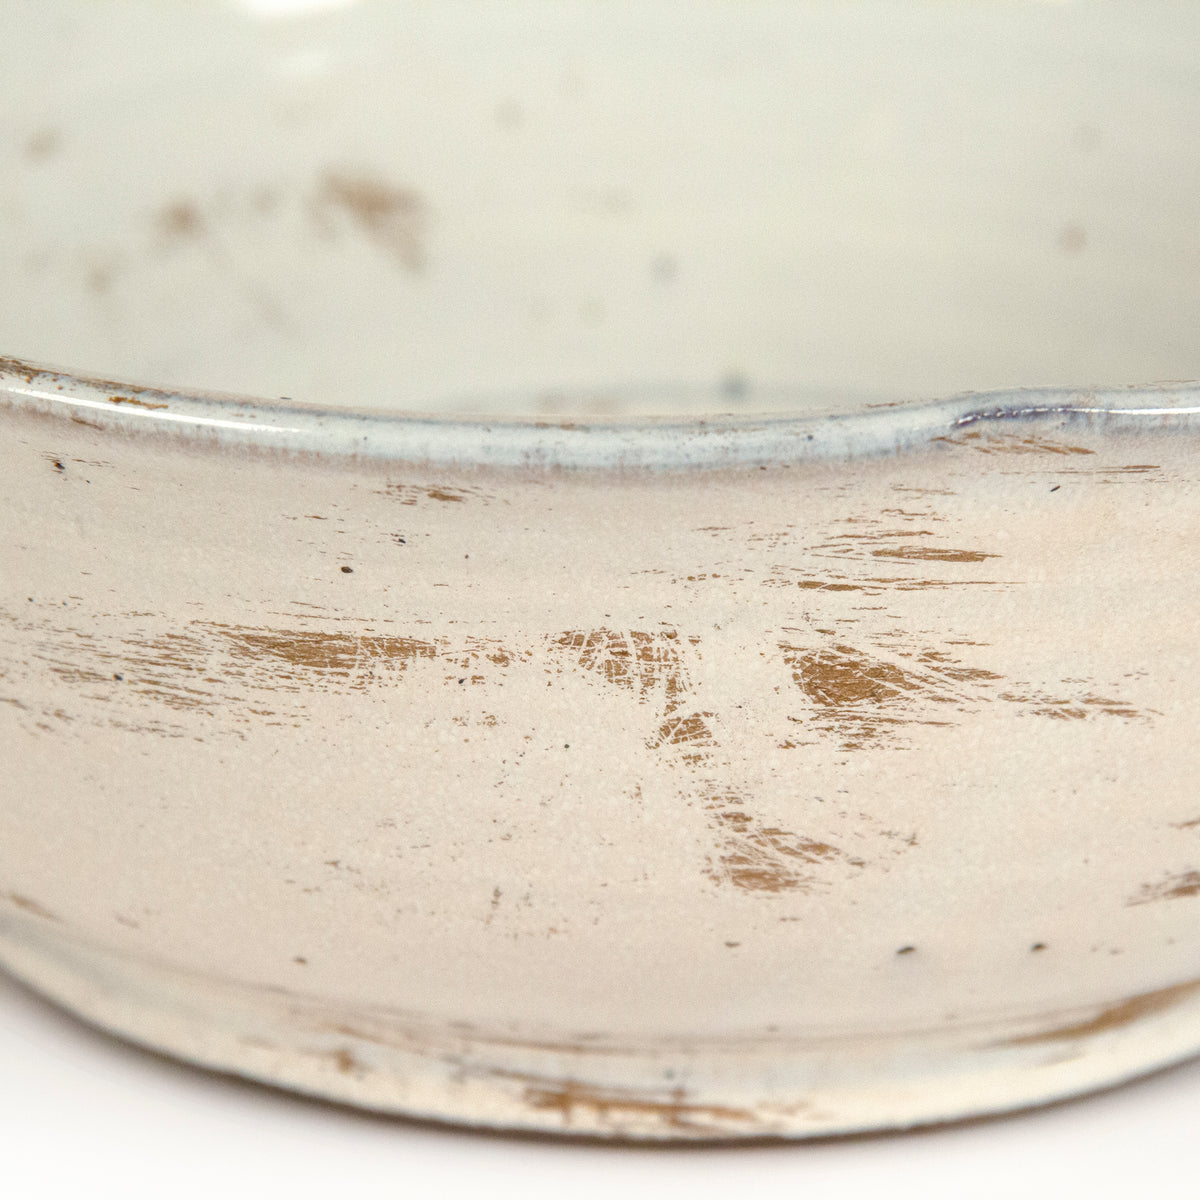 Distressed Off-White Flare Bowl by Zentique